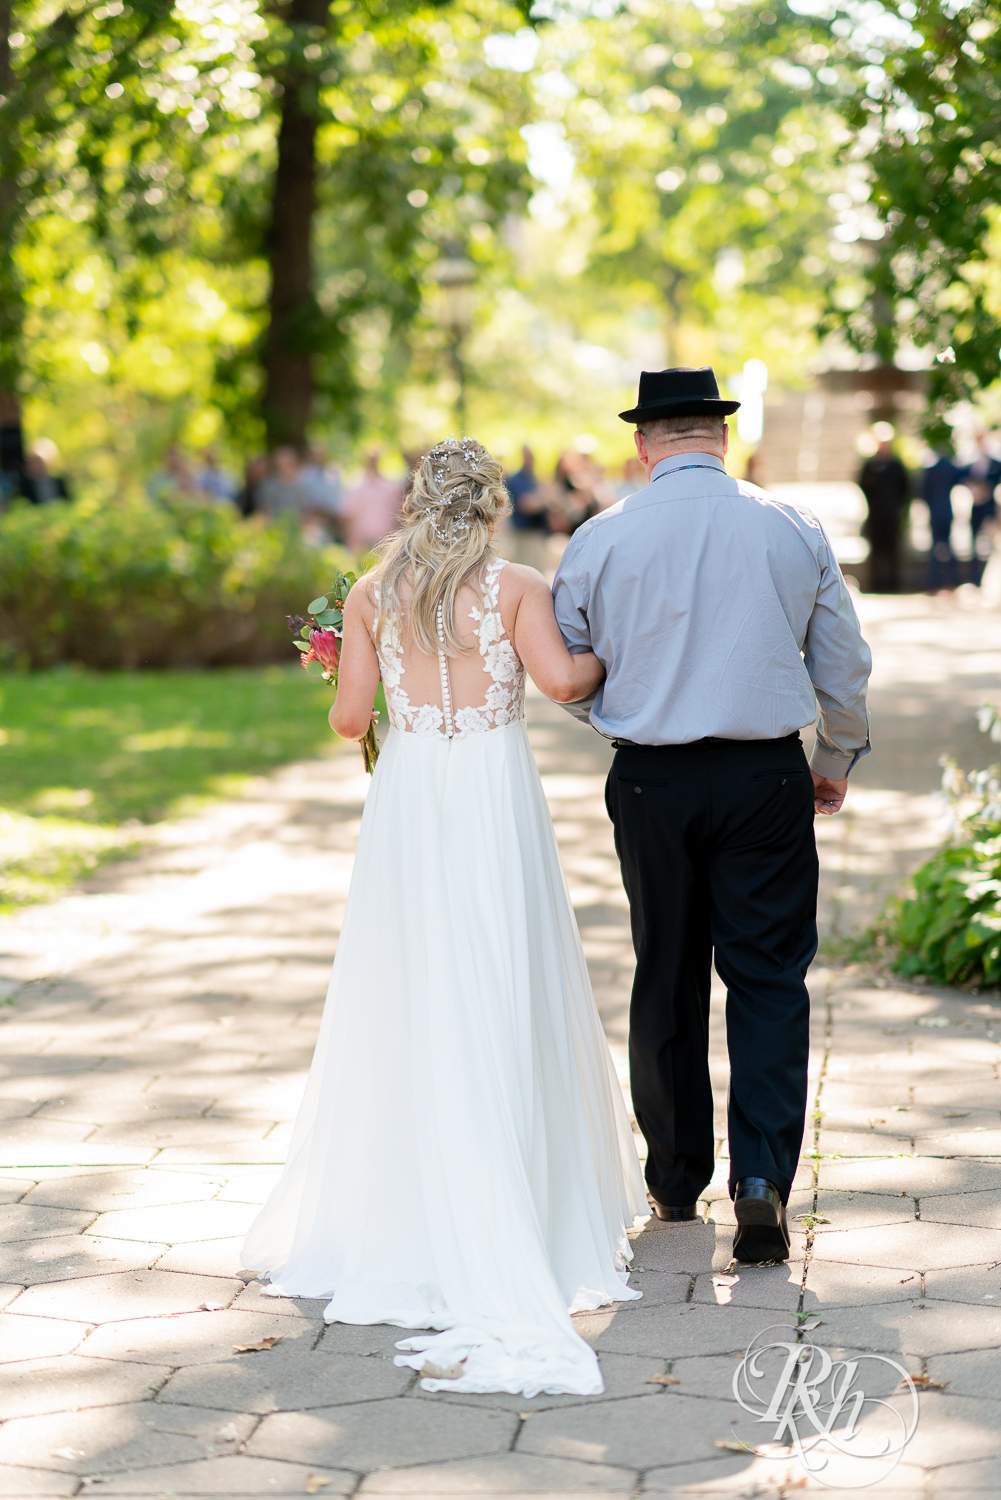 Bride walking down the aisle with her dad at Irvine Park in Saint Paul, Minnesota.